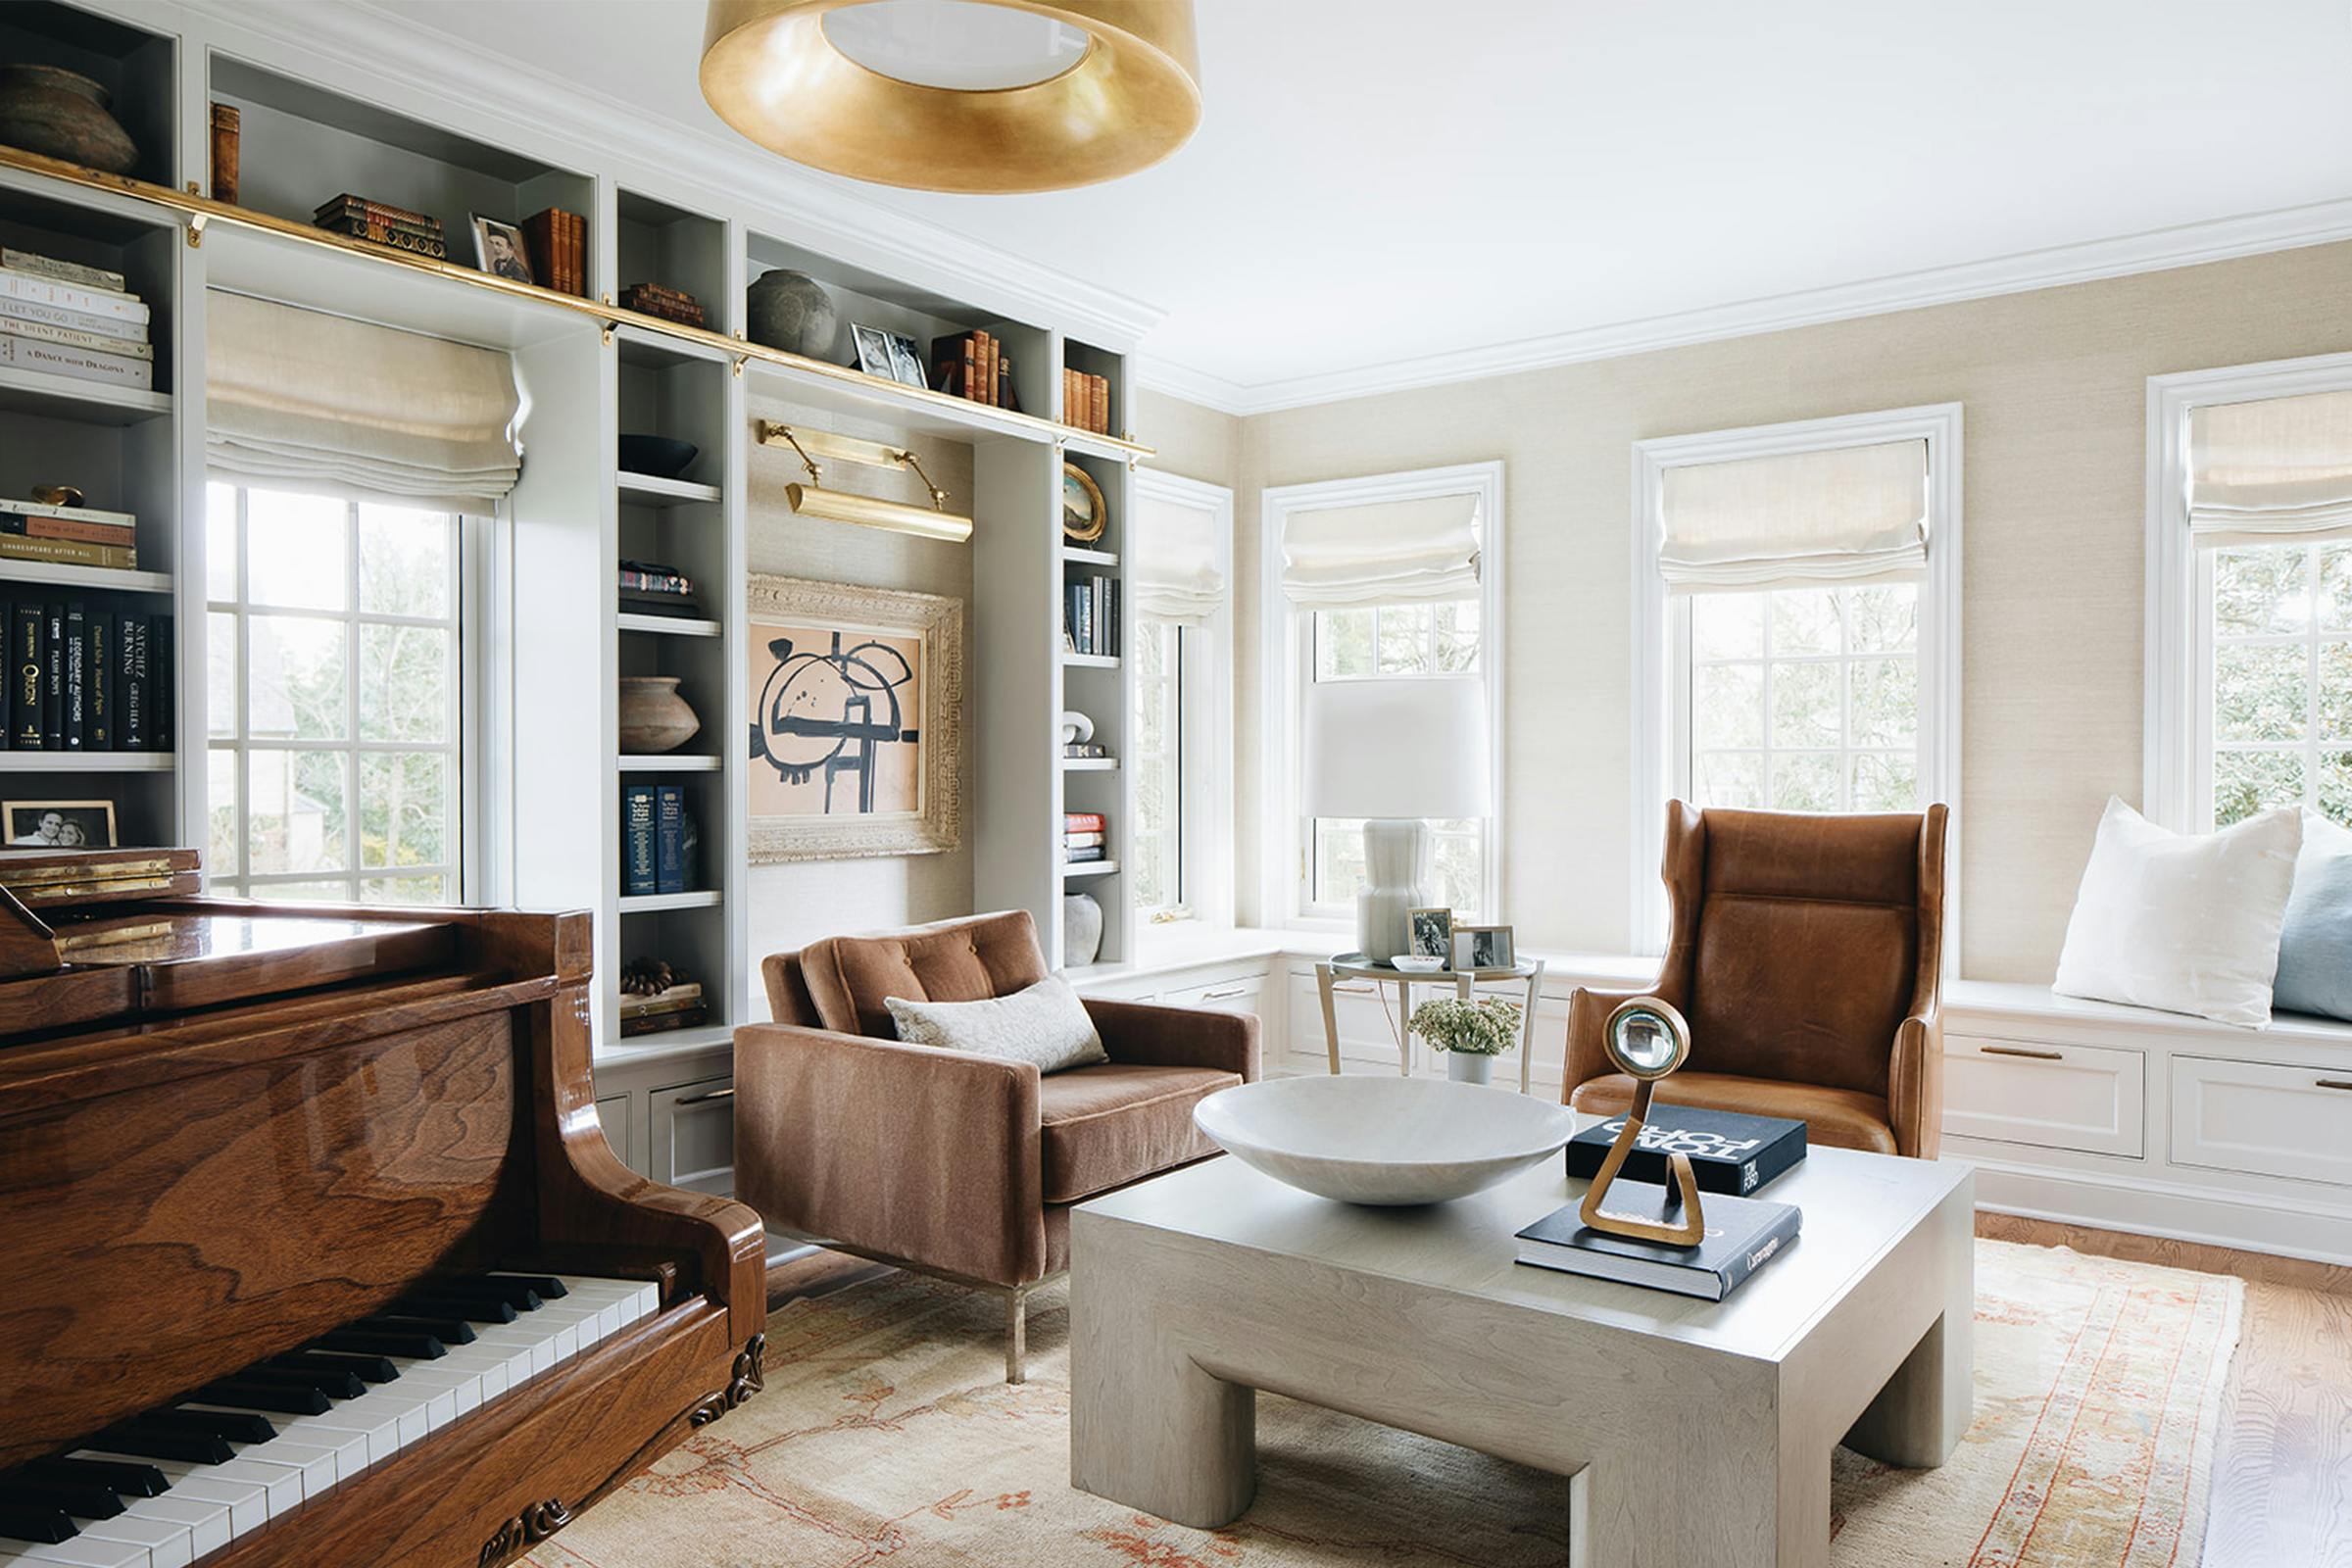 Nicole-Green-Design-Project-Chevy-Chase-Historic-East-Coast-Home-Piano-Library